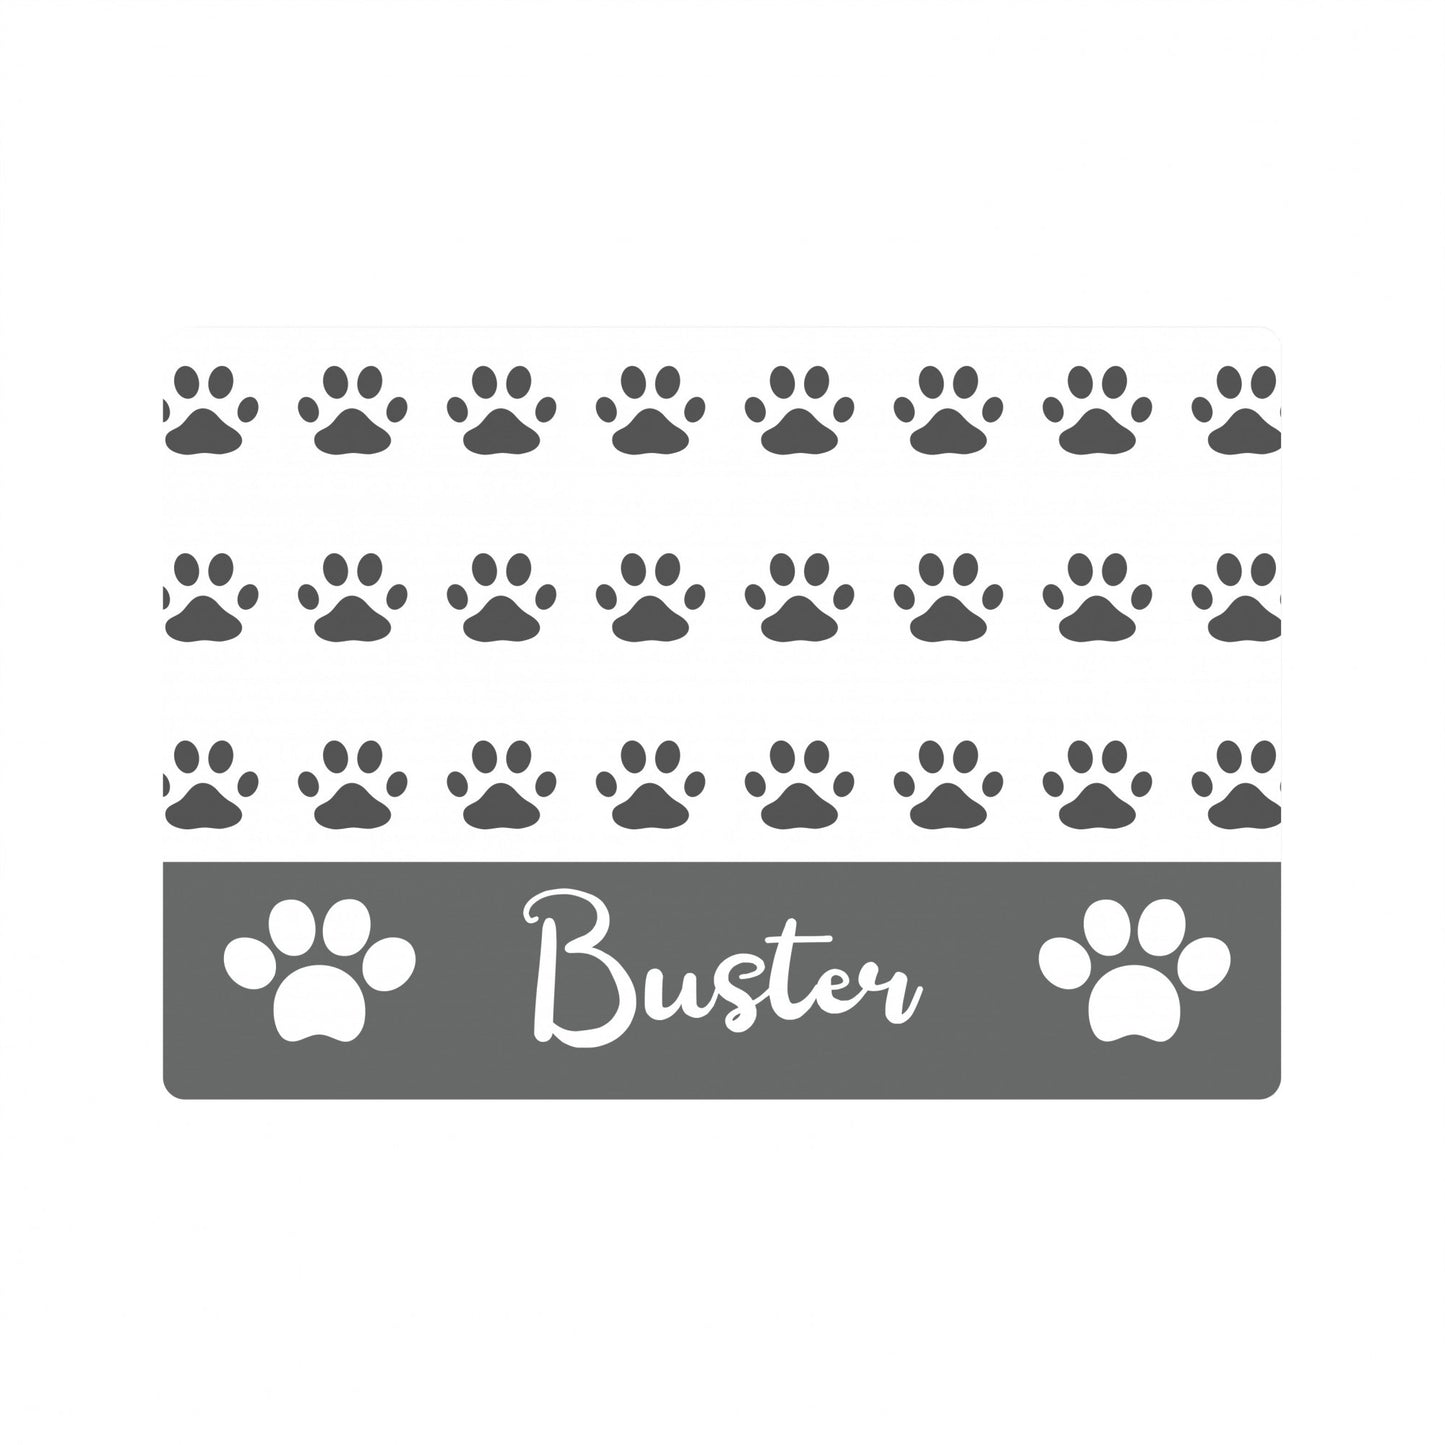 Personalized Pet Placemat - Gray Paws